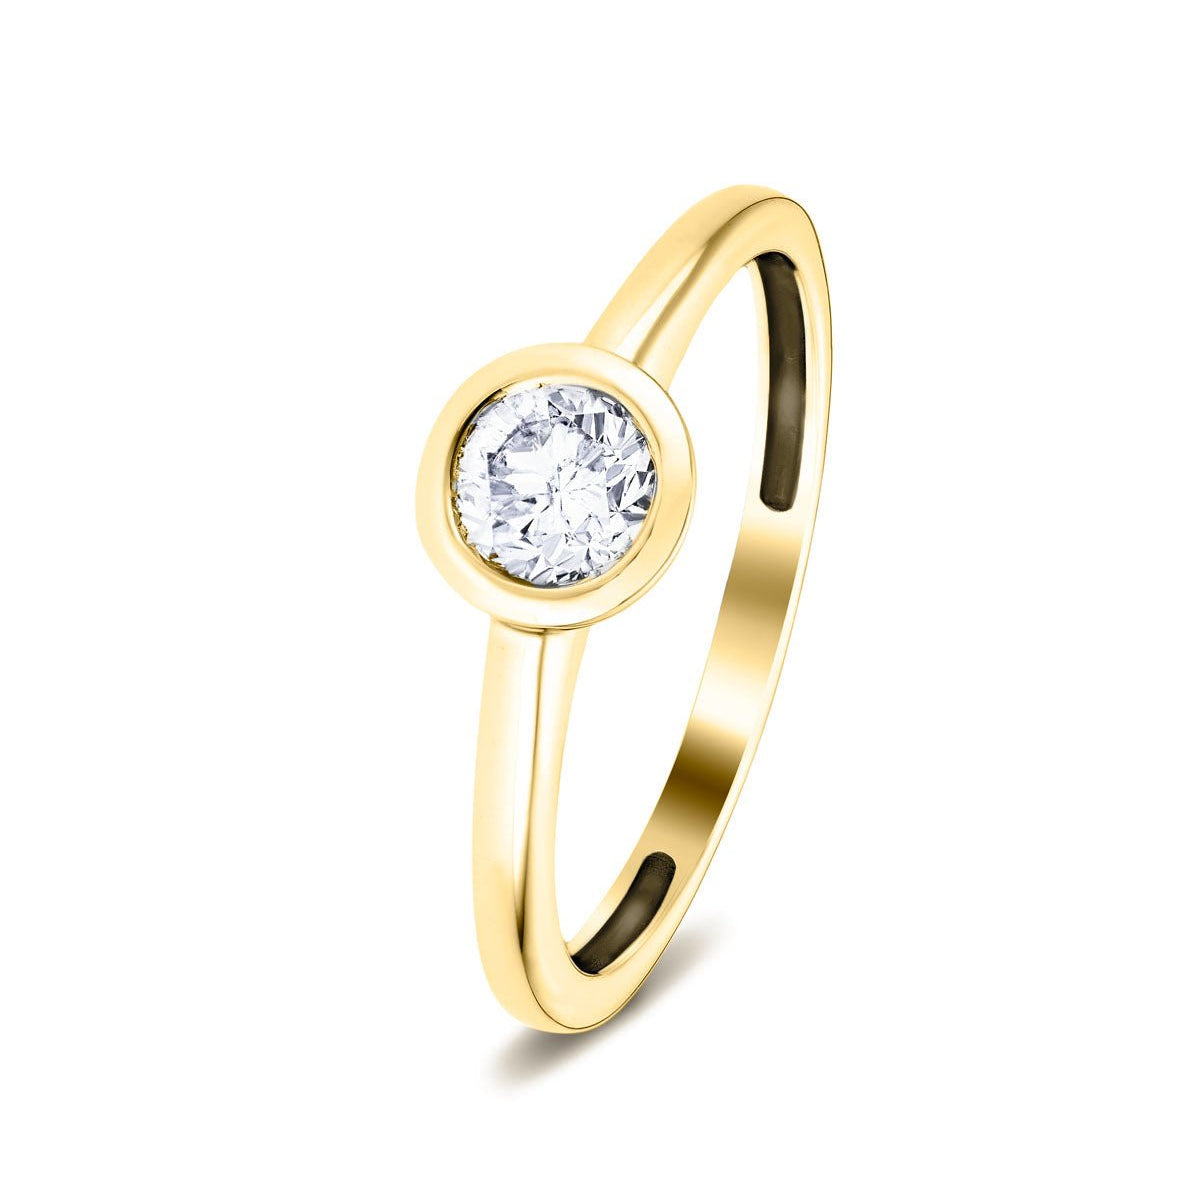 Certified Rub Over Diamond Solitaire Engagement Ring 0.75ct G/SI 18k Yellow Gold - All Diamond